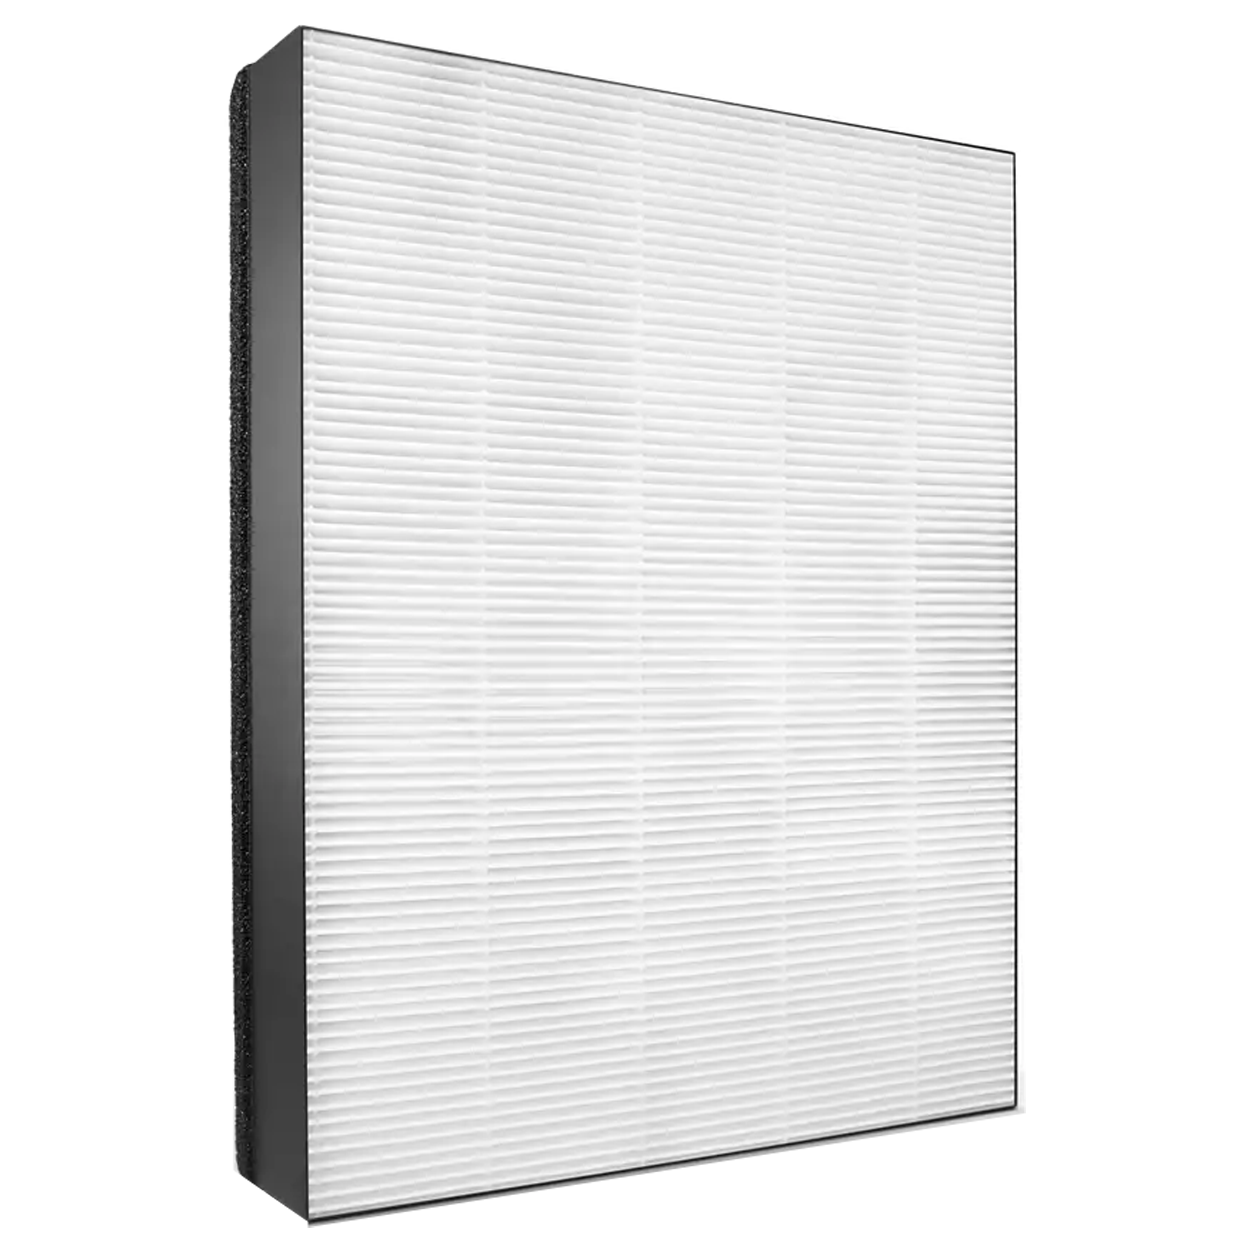 Philips FY5185/10 Air Purifier Filter_1